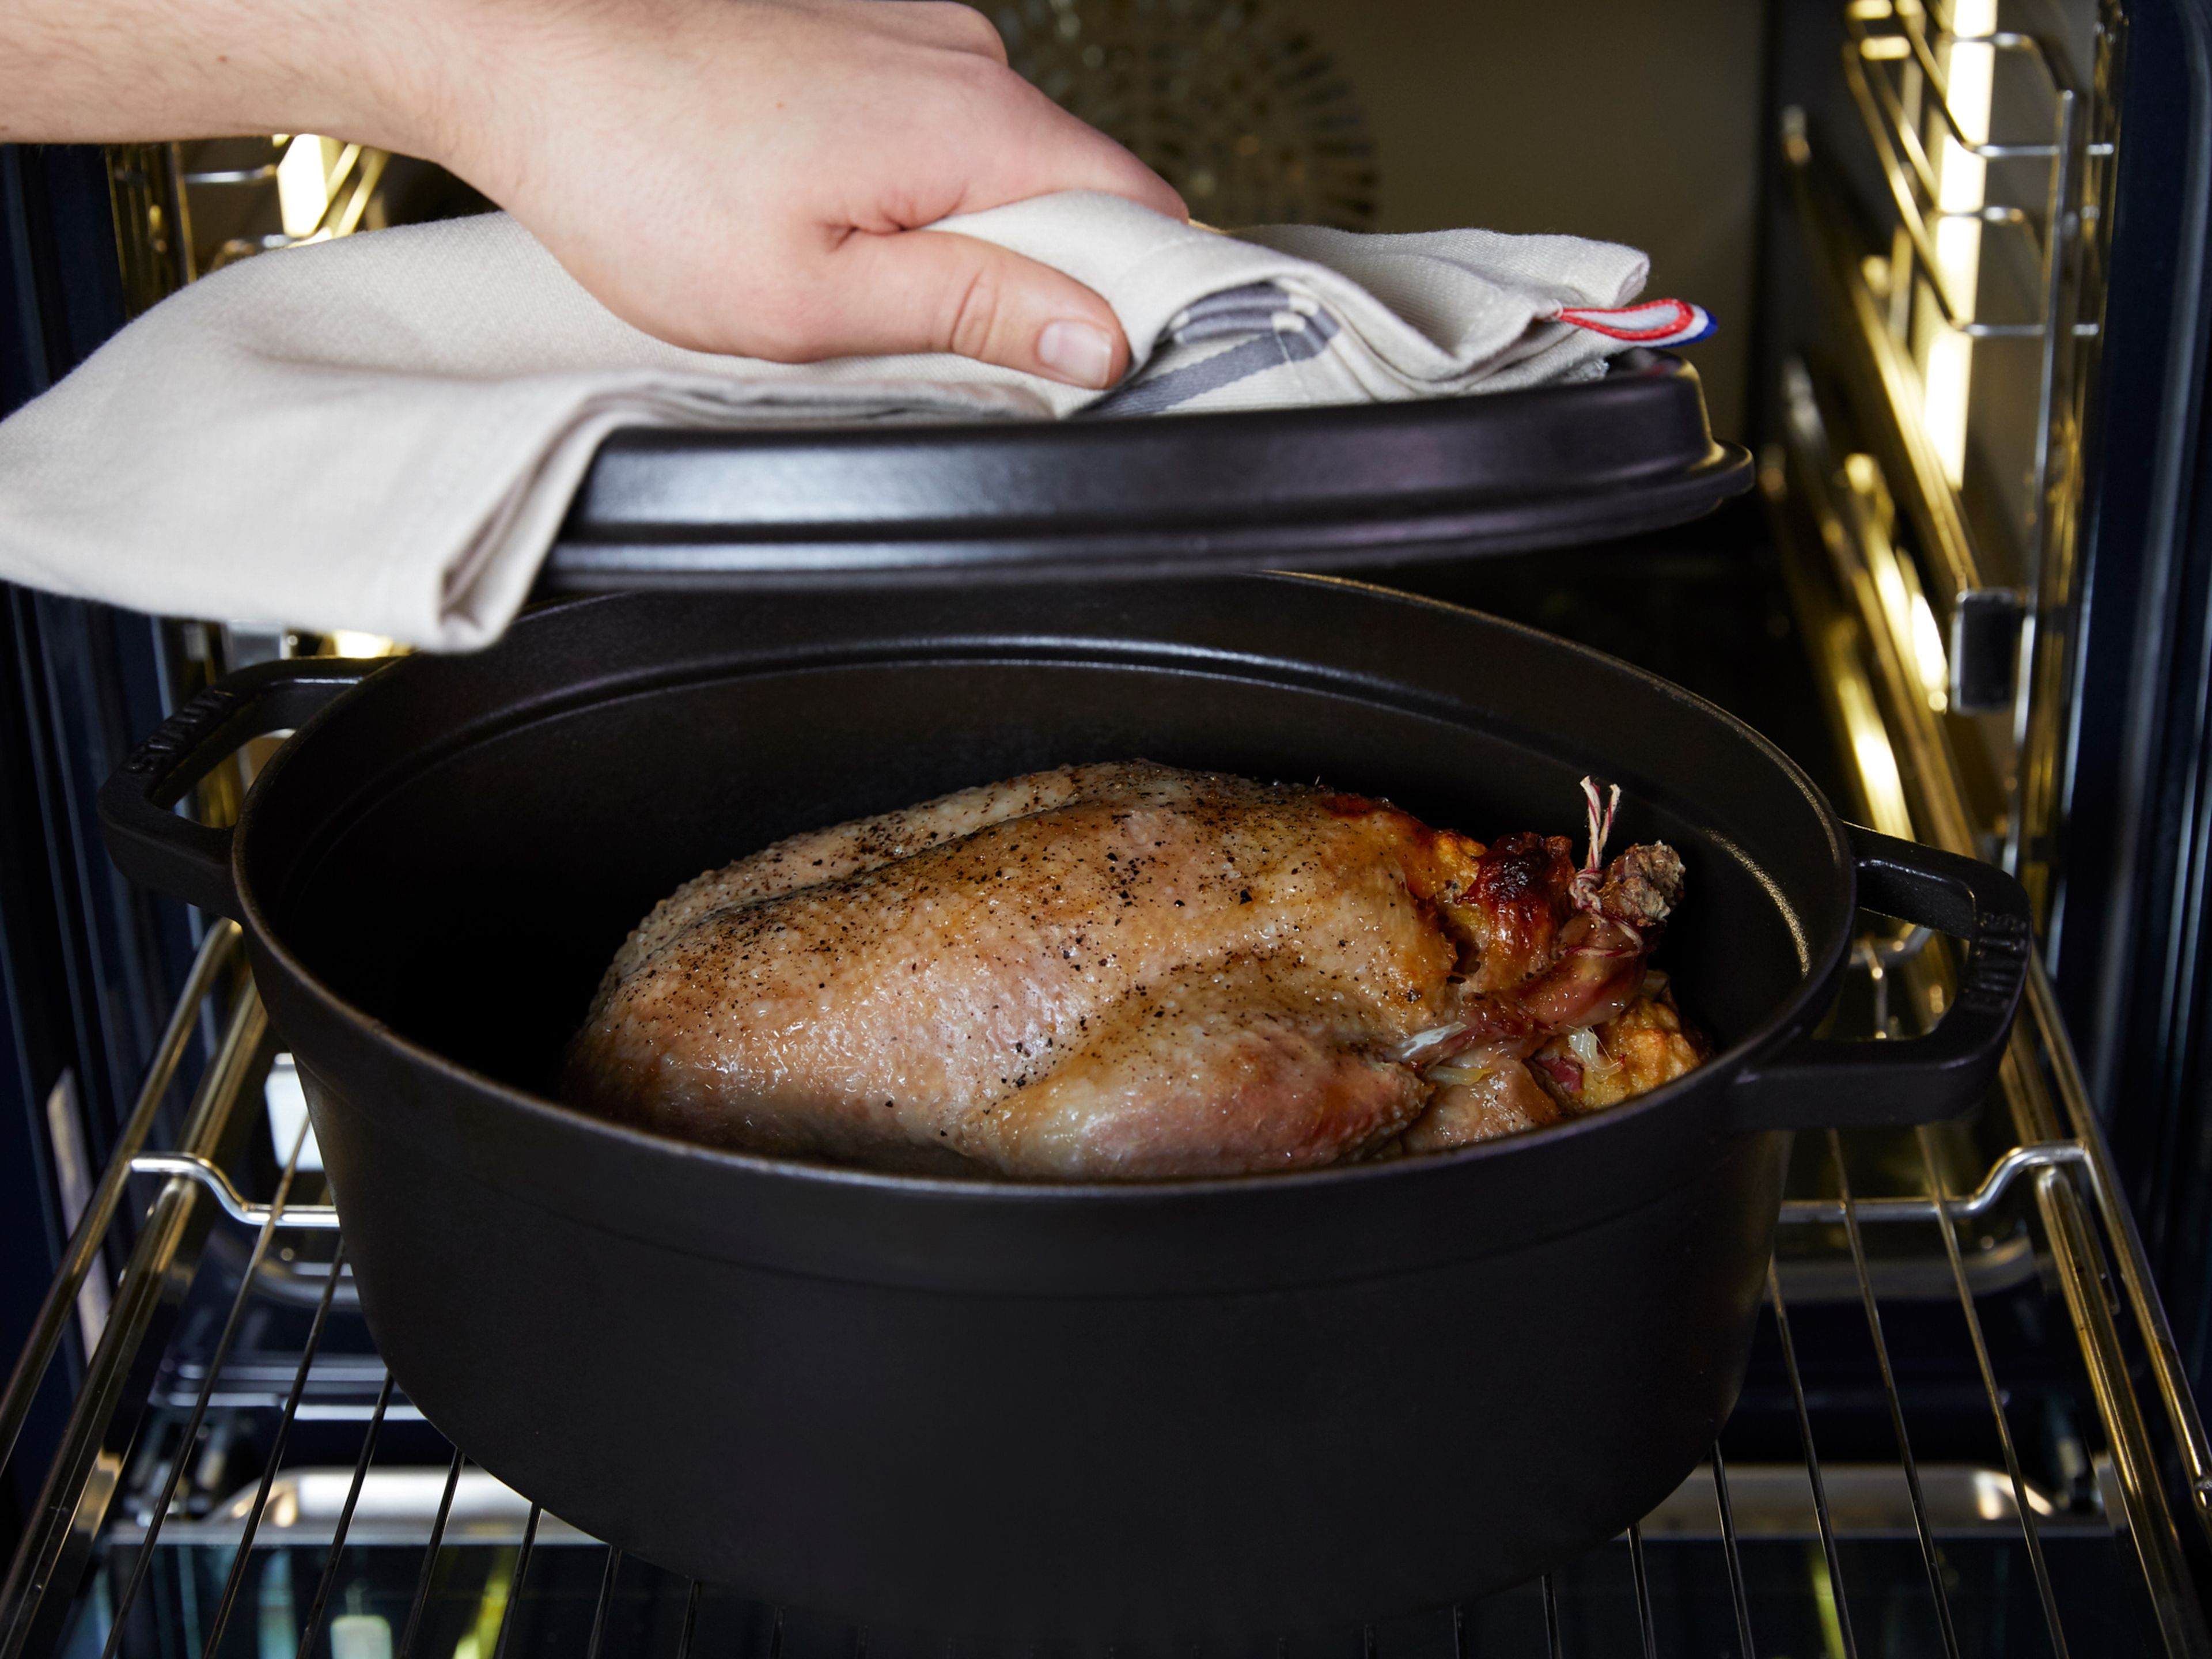 Transfer duck to a baking dish. Add water to the dish, then cover and transfer to the oven. Roast at 180ºC/350ºF for approx. 2 hr., then remove the lid and increase temperature to 200ºC/400ºF and roast for 30 min. more. Serve with cooked red cabbage, and enjoy!